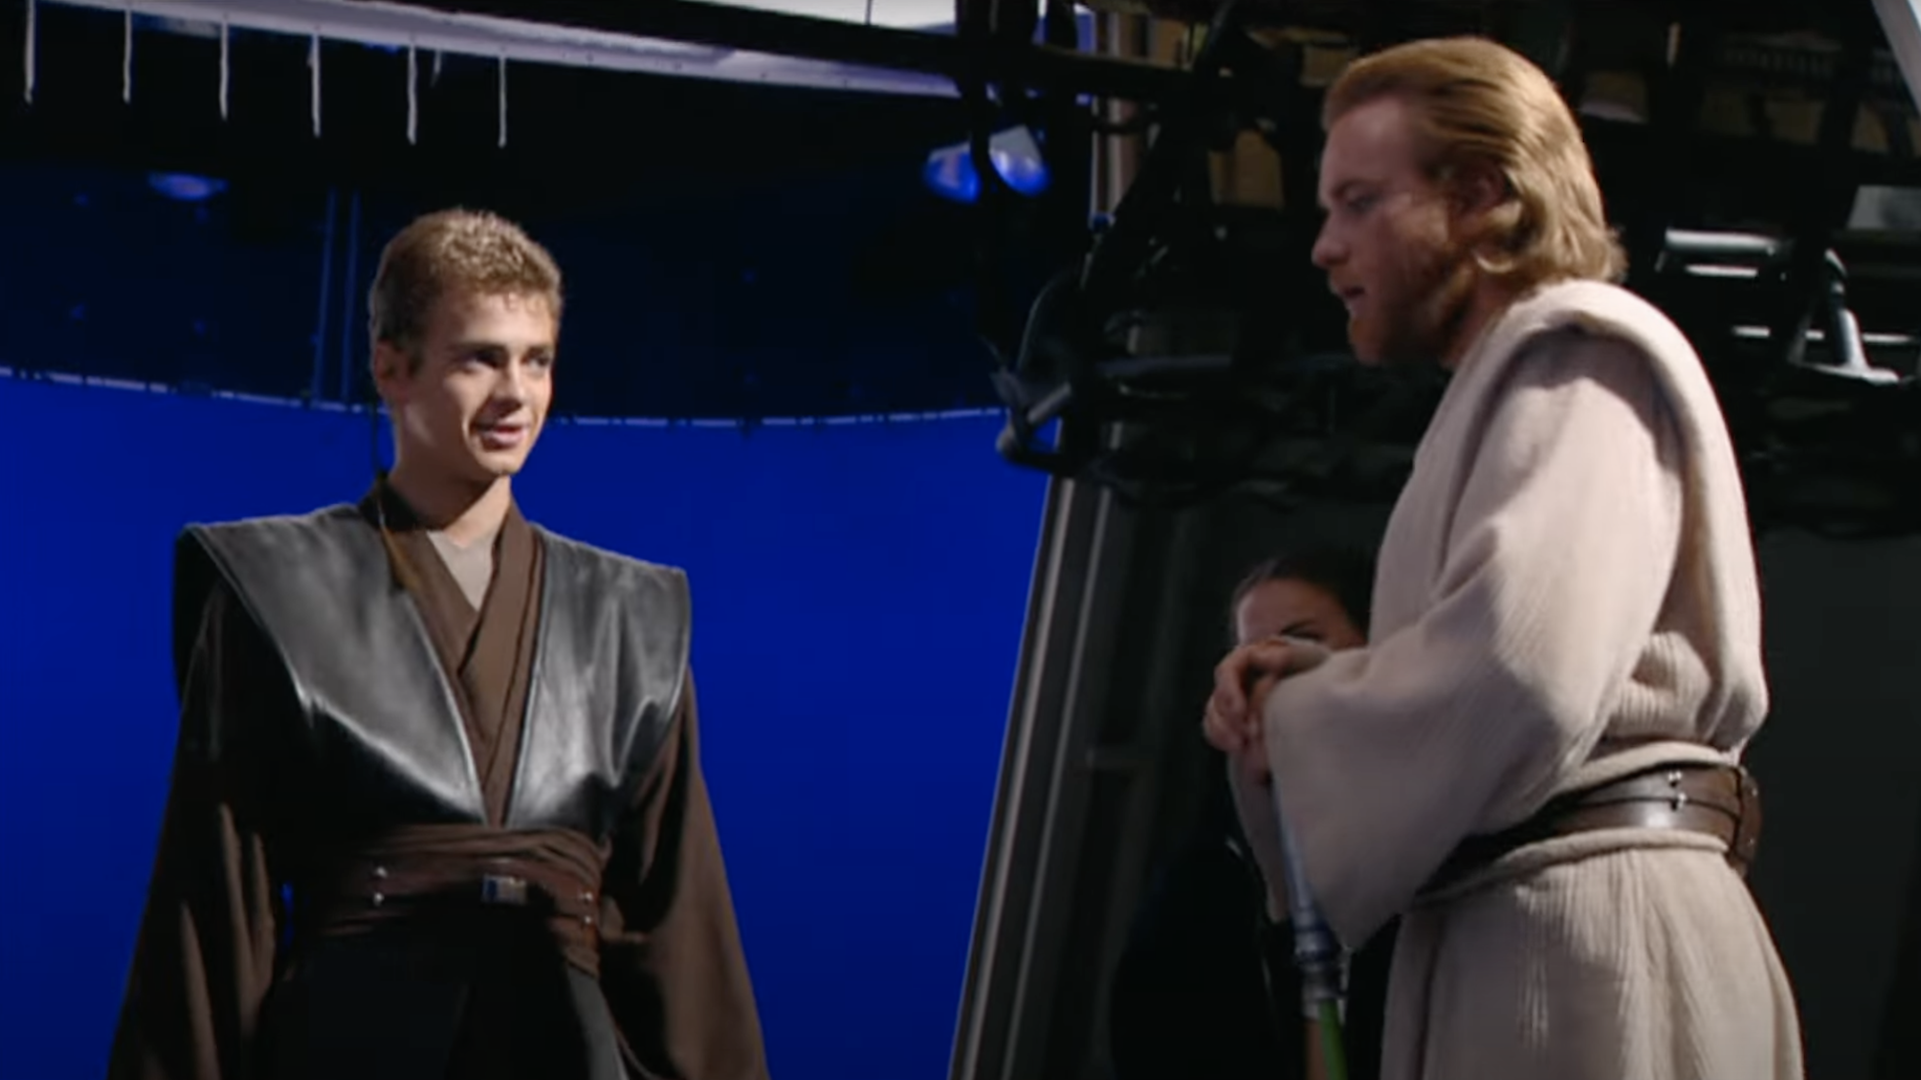 Two actors in Jedi robes stand in front of a blue screen.